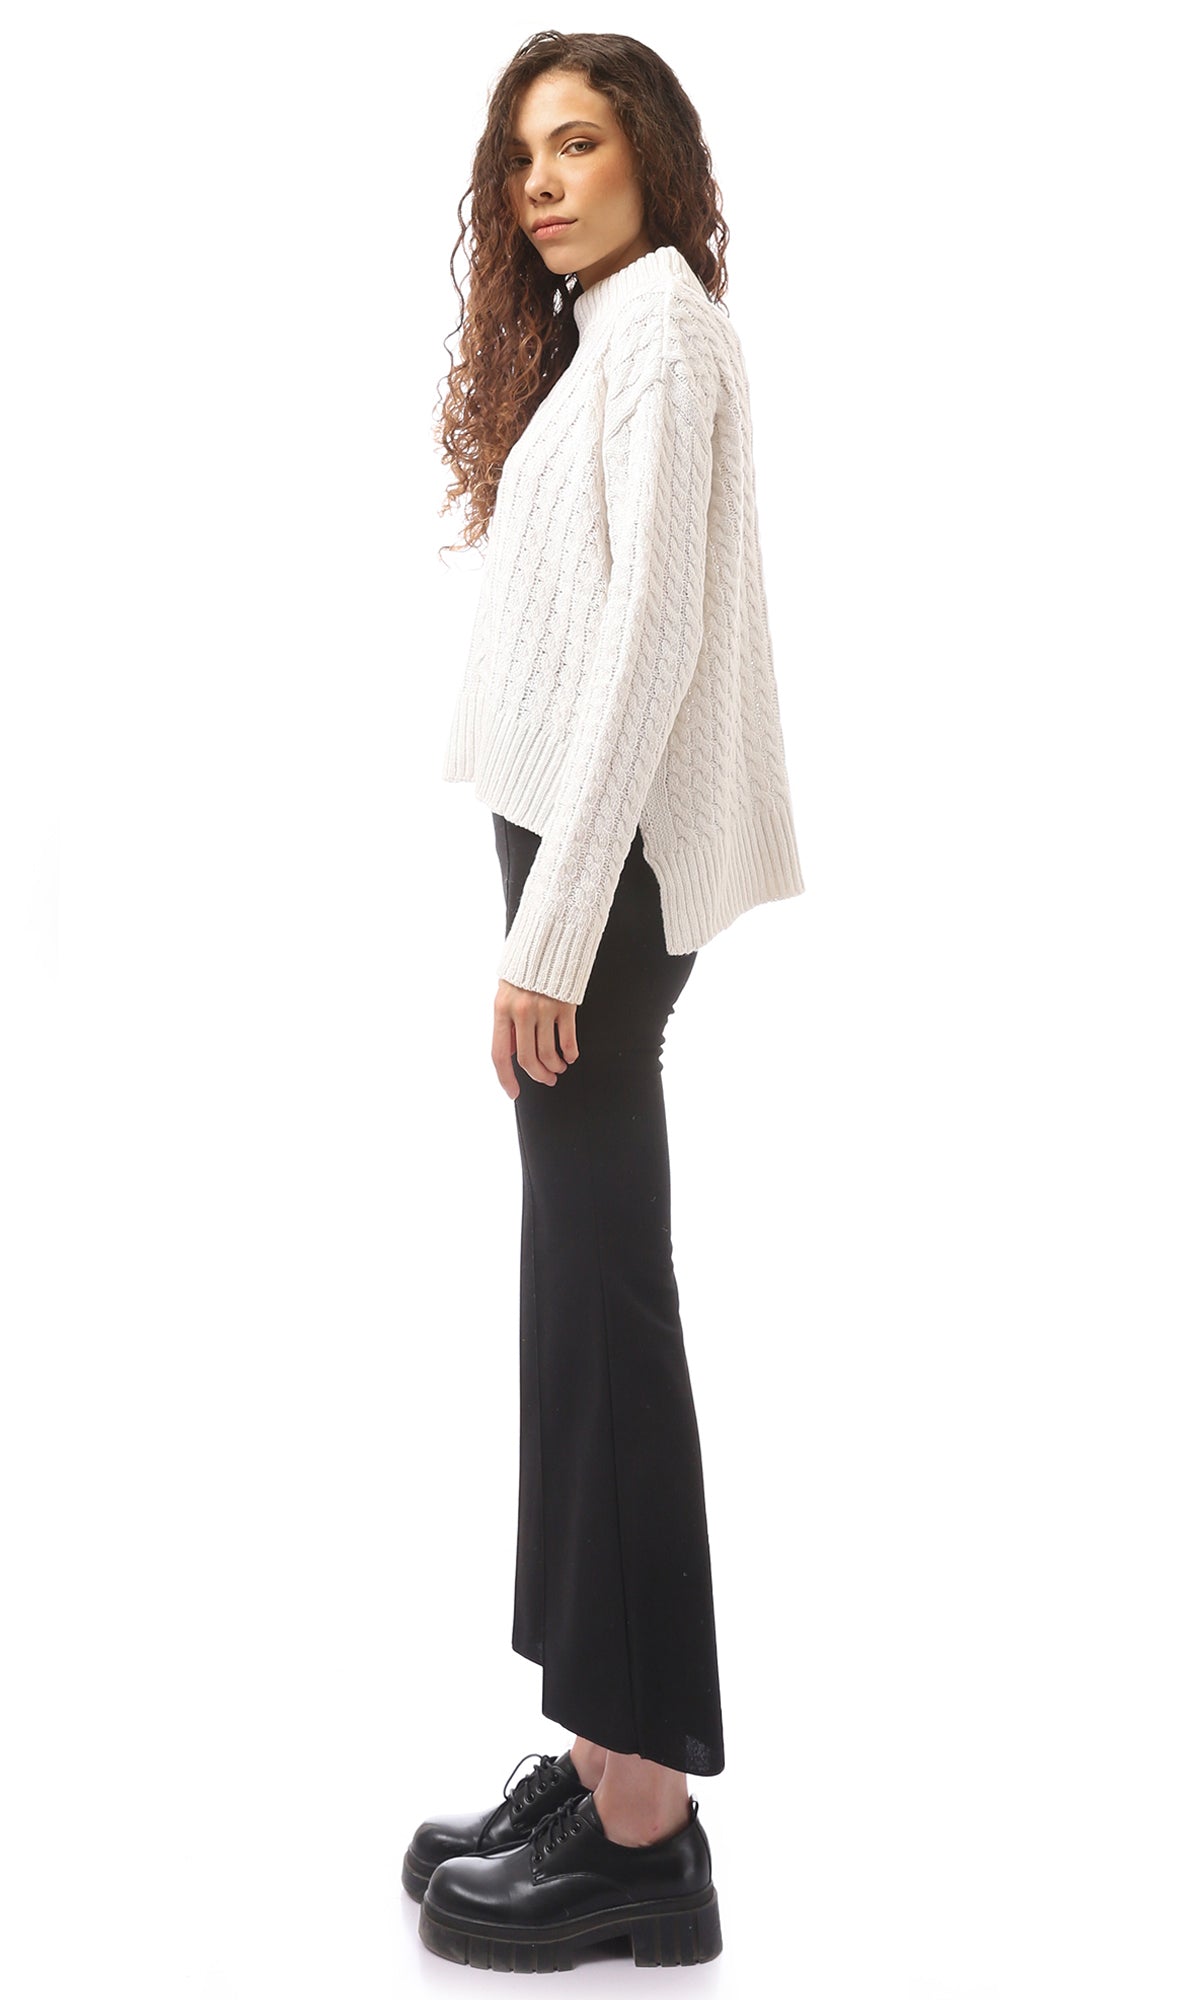 O169846 Turtle Neck Slip On Offwhite Pullover